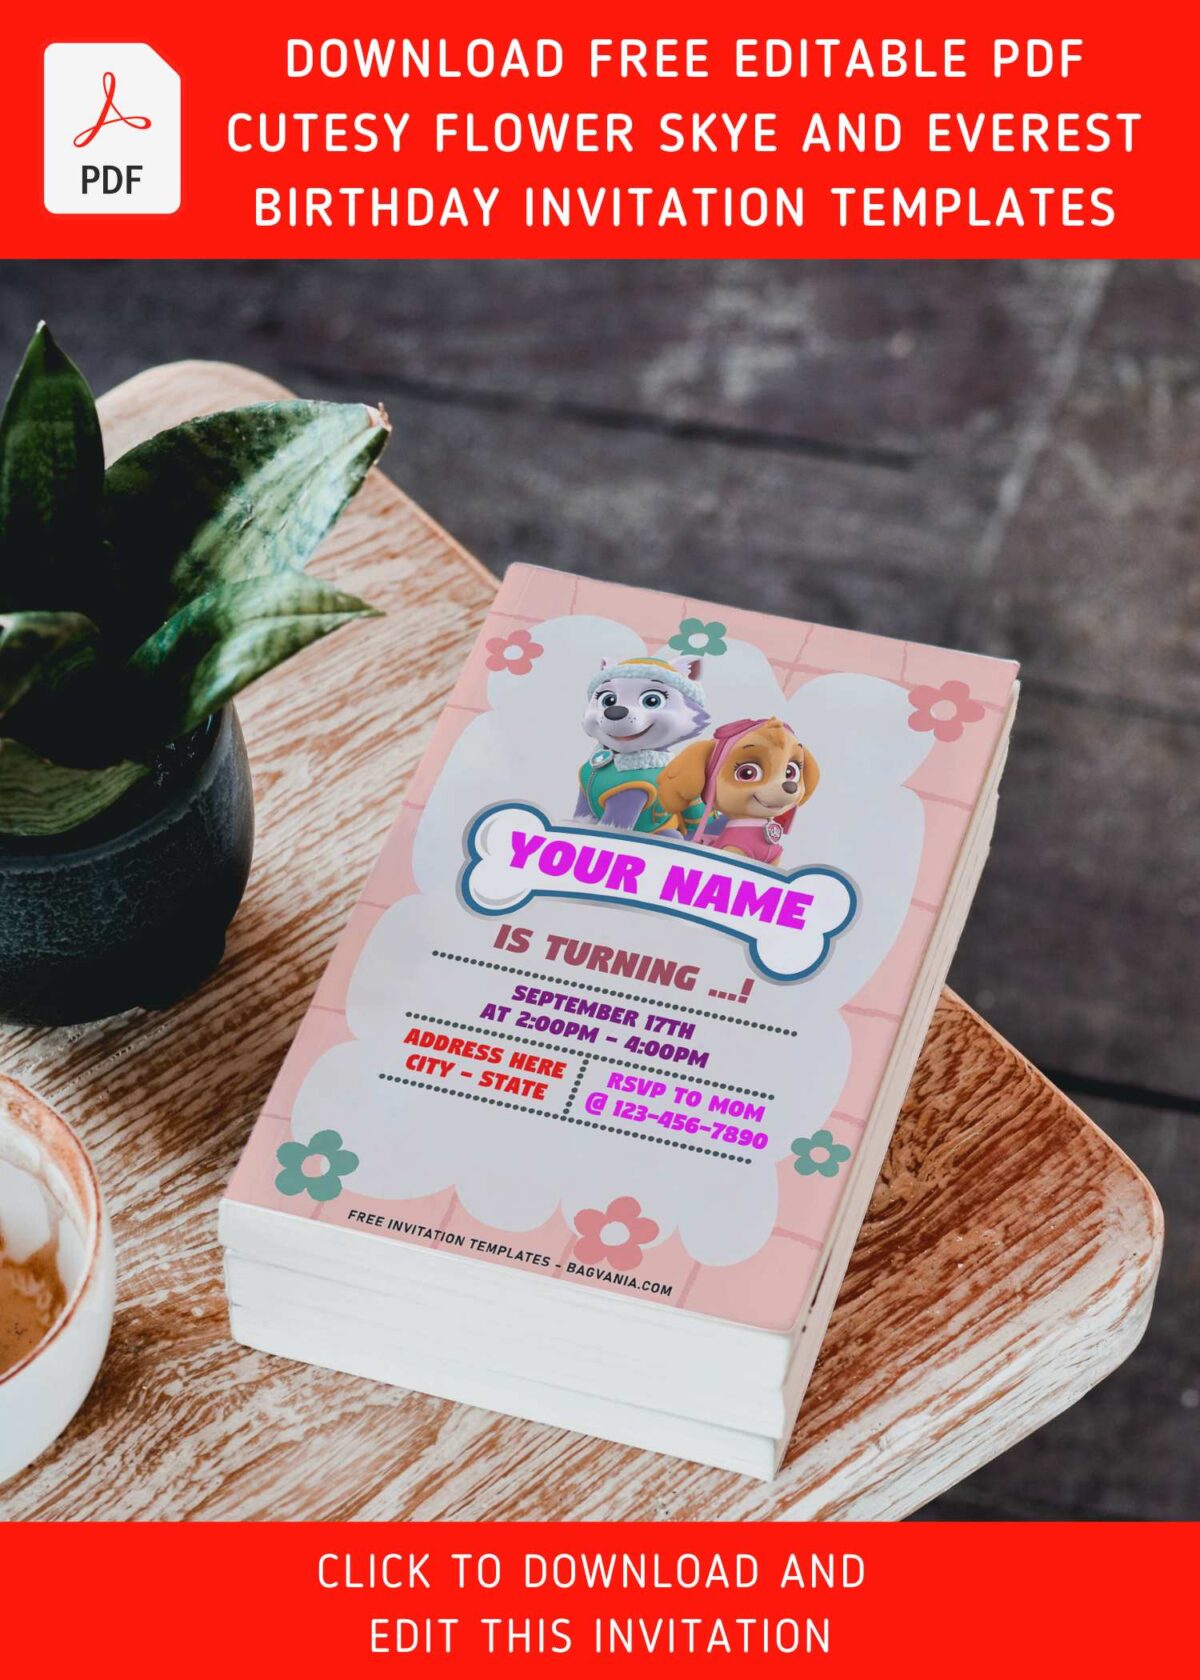 (Free Editable PDF) Quirky Cute Skye And Everest PAW Patrol Birthday Invitation Templates with cute flowers